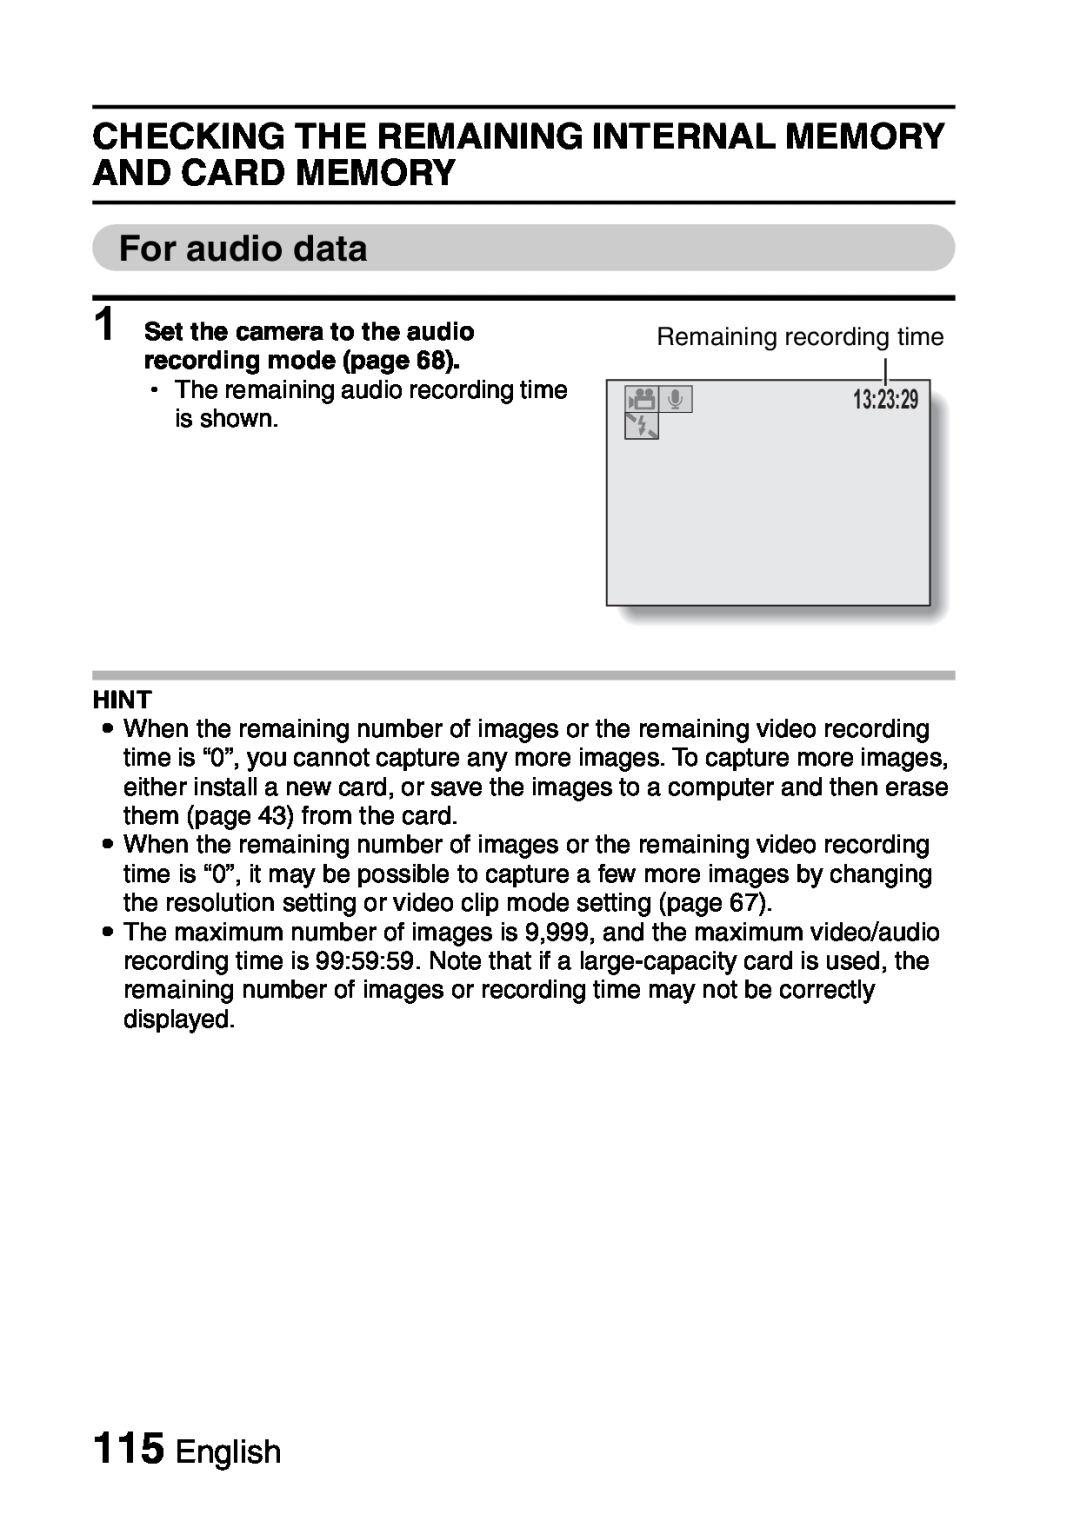 Samsung R50 CHECKING THE REMAINING INTERNAL MEMORY AND CARD MEMORY For audio data, English, 132329, recording mode page 